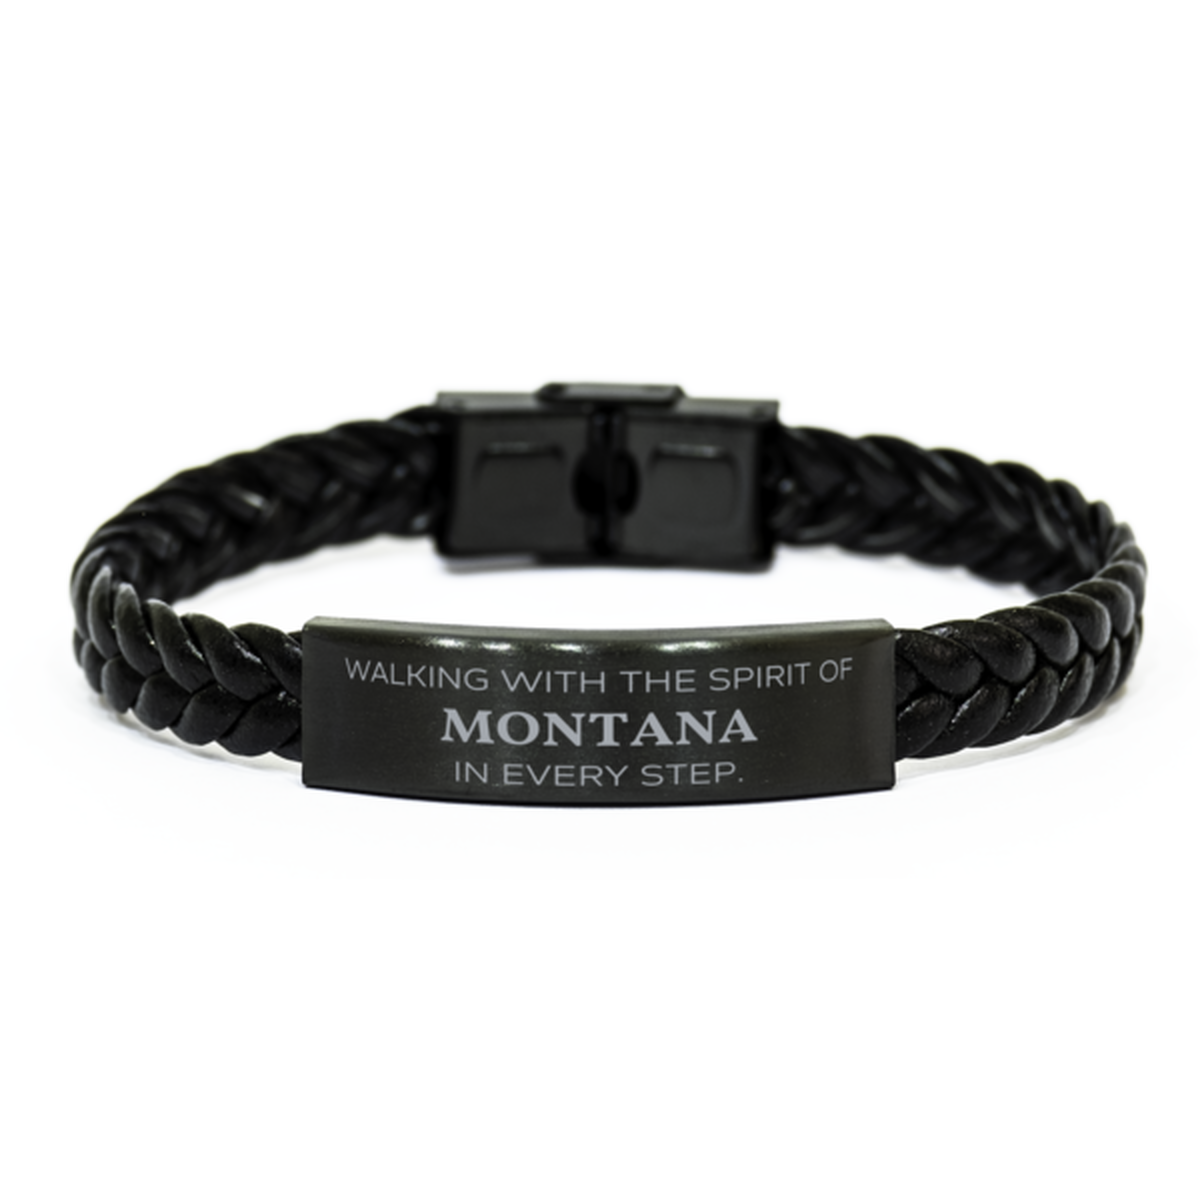 Montana Gifts, Walking with the spirit, Love Montana Birthday Christmas Braided Leather Bracelet For Montana People, Men, Women, Friends